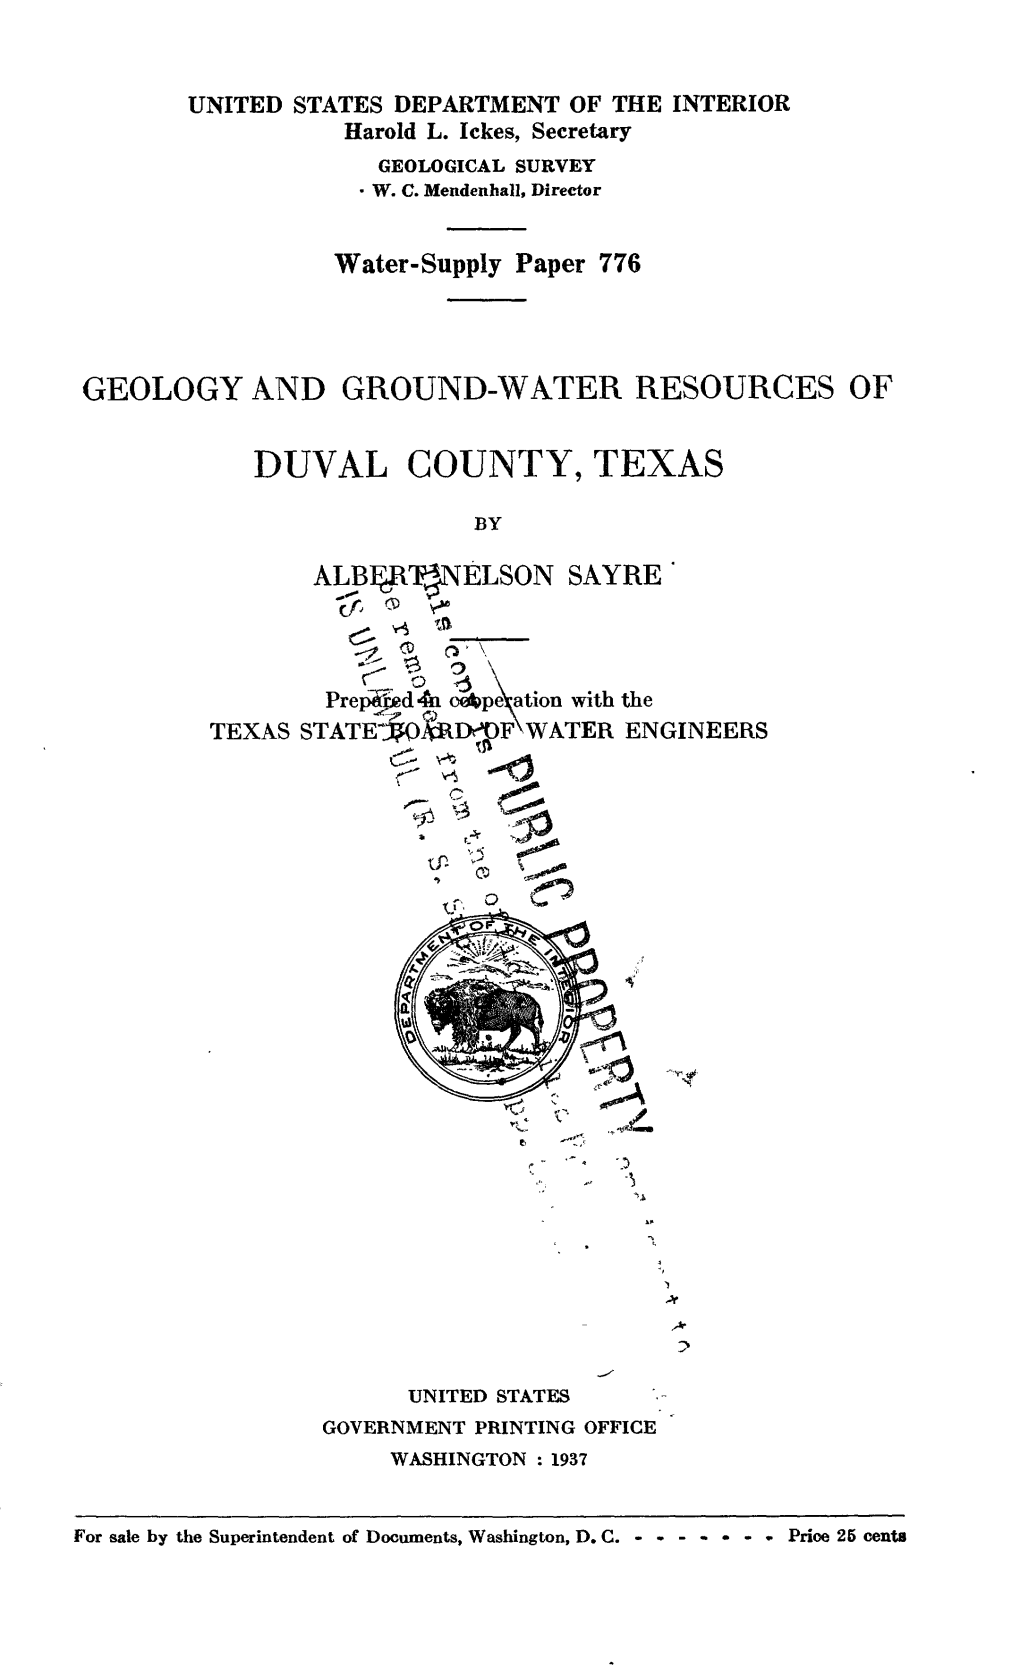 Geology and Ground-Water Resources of Duval County, Texas